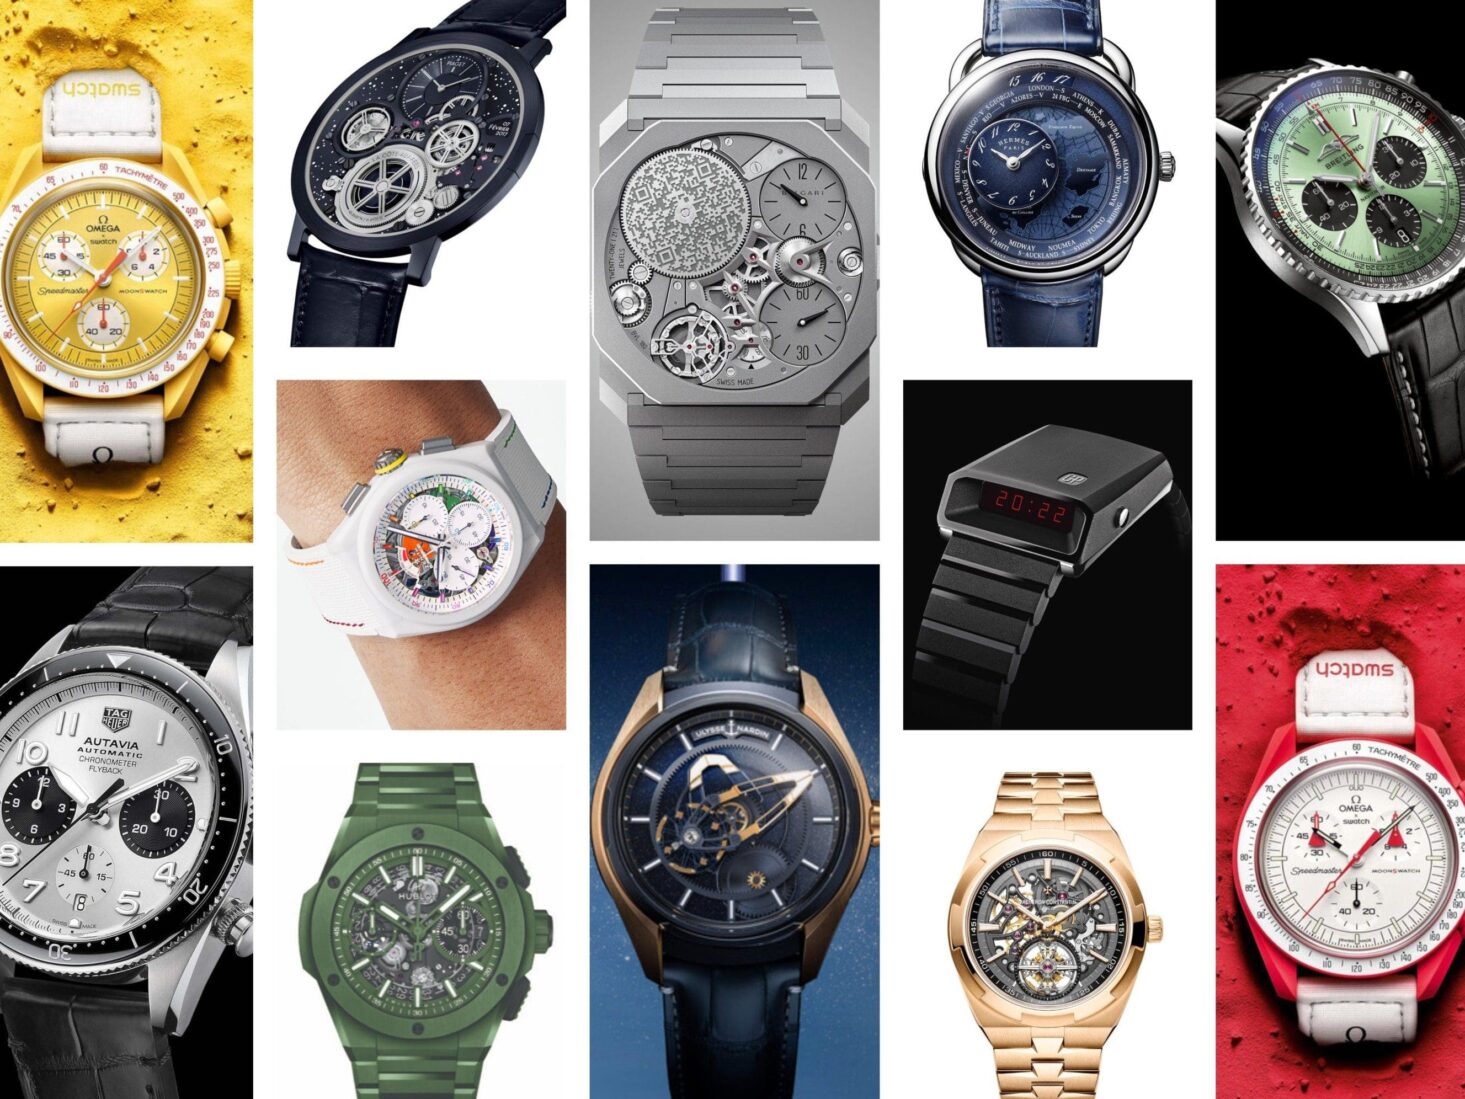 The 13 Most Expensive Watch Brands in the World